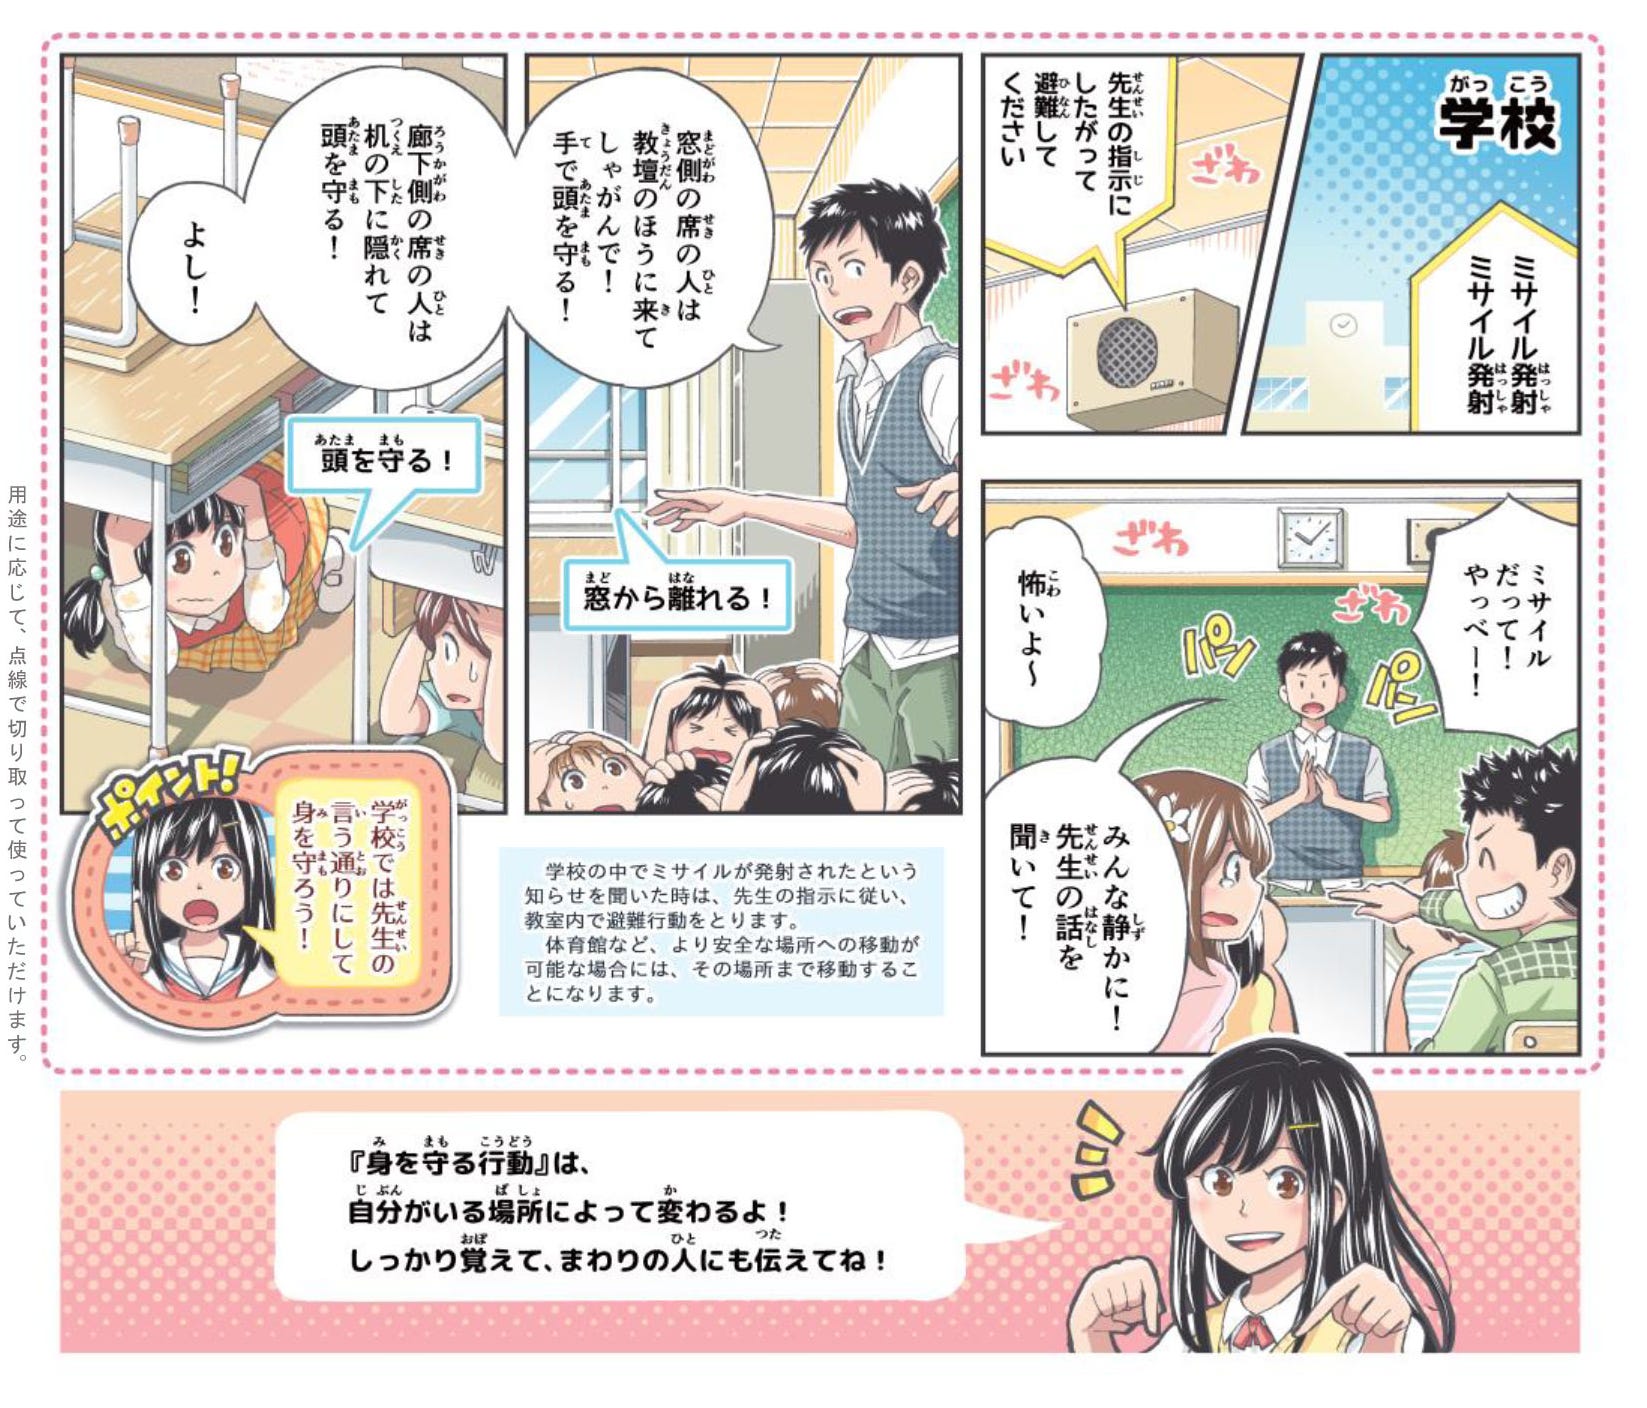 A Japanese manga comic explains what to do in the event of a North Korean missile launch.